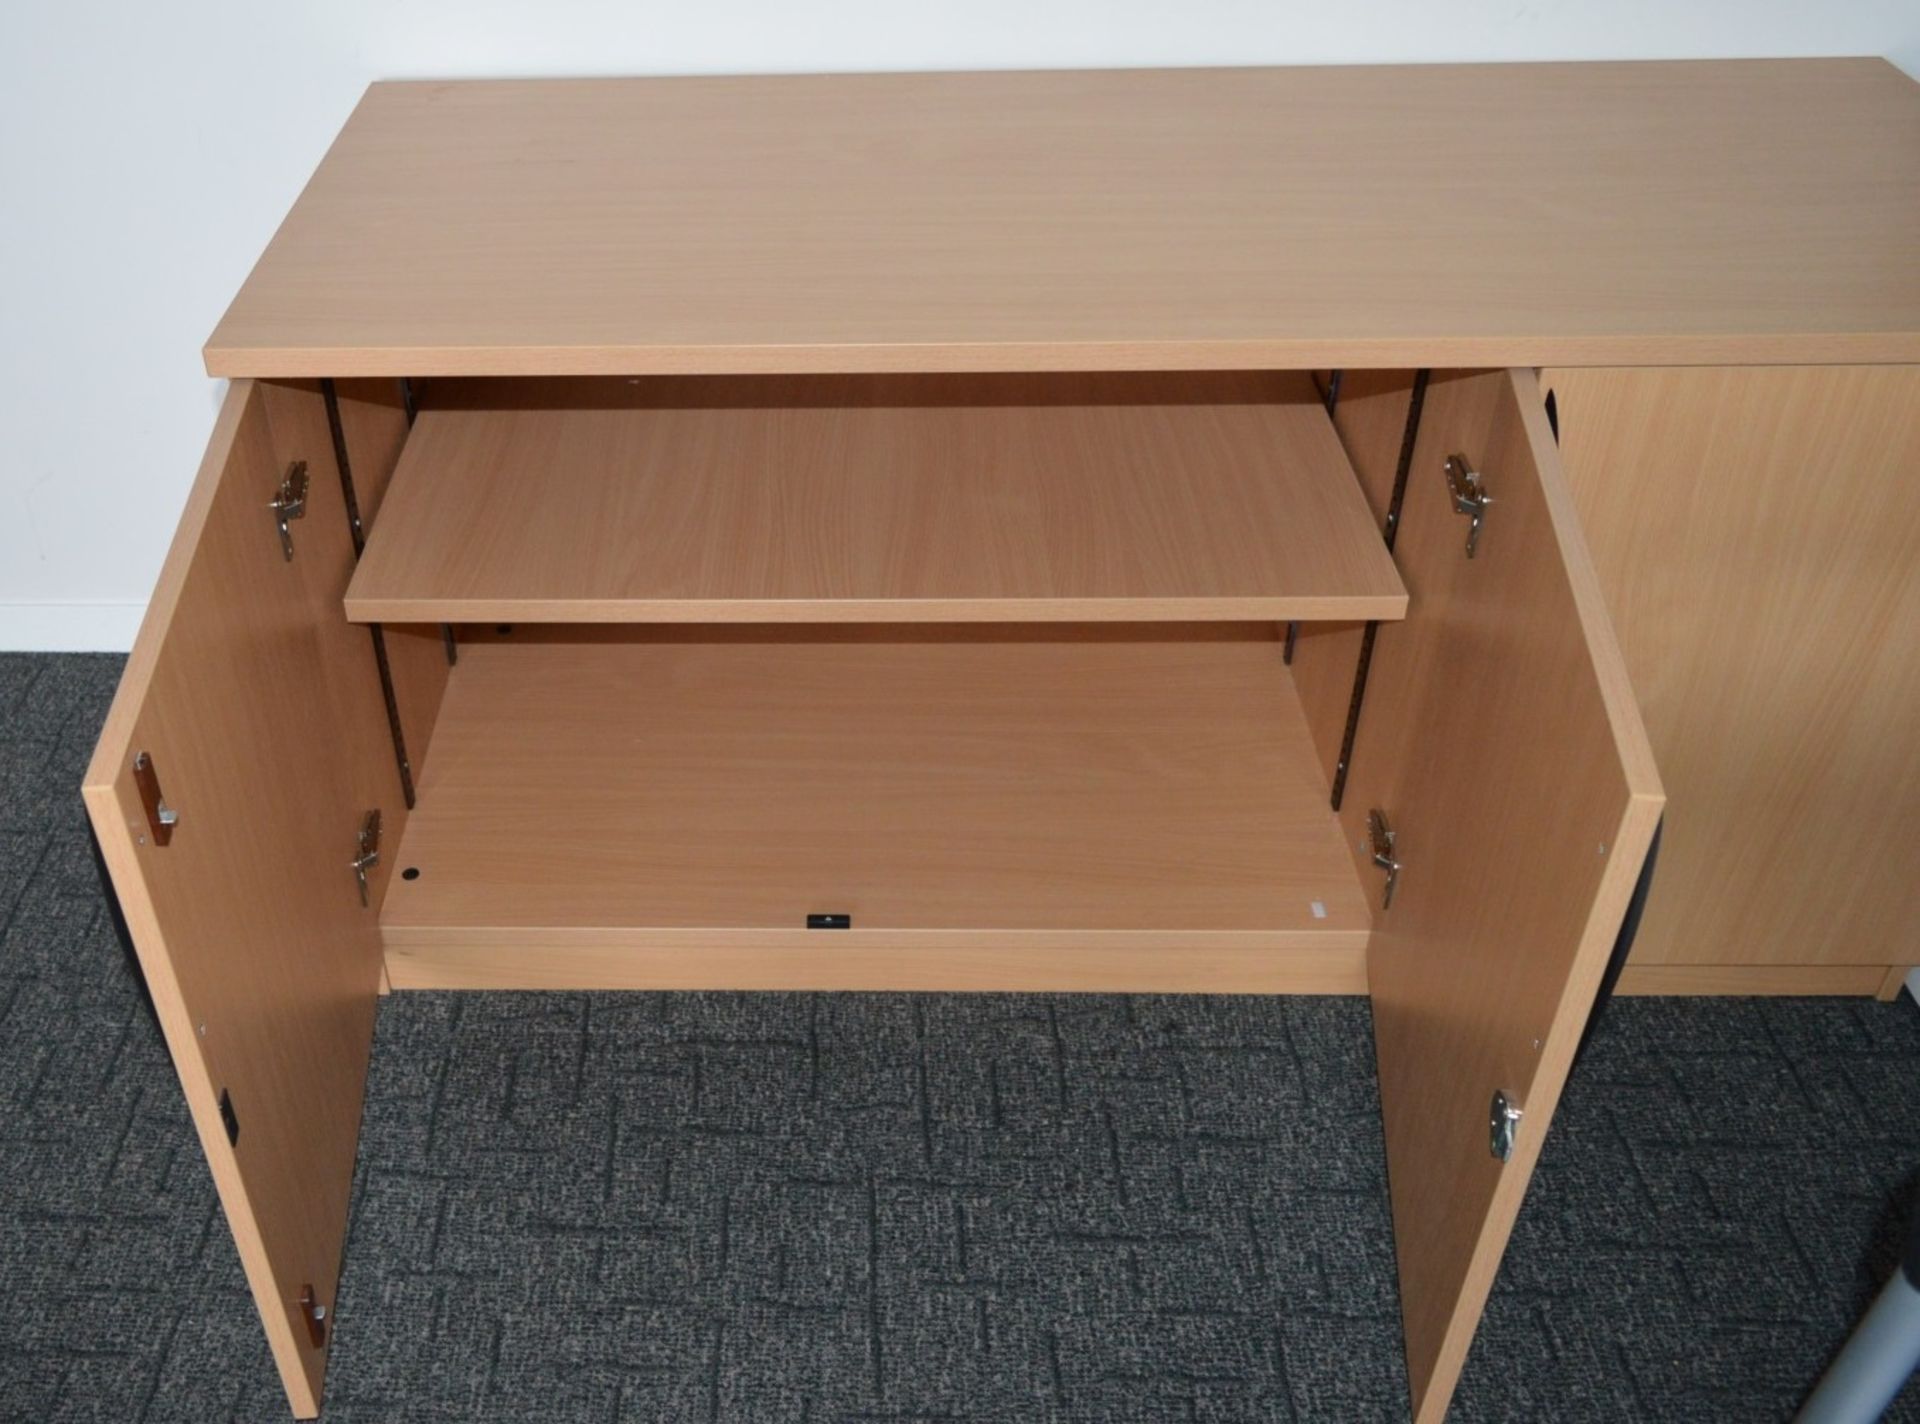 1 x Contemporary Three Door Office Cabinet With Beech Finish - CL011 - Location: Altrincham WA14 - Image 2 of 2